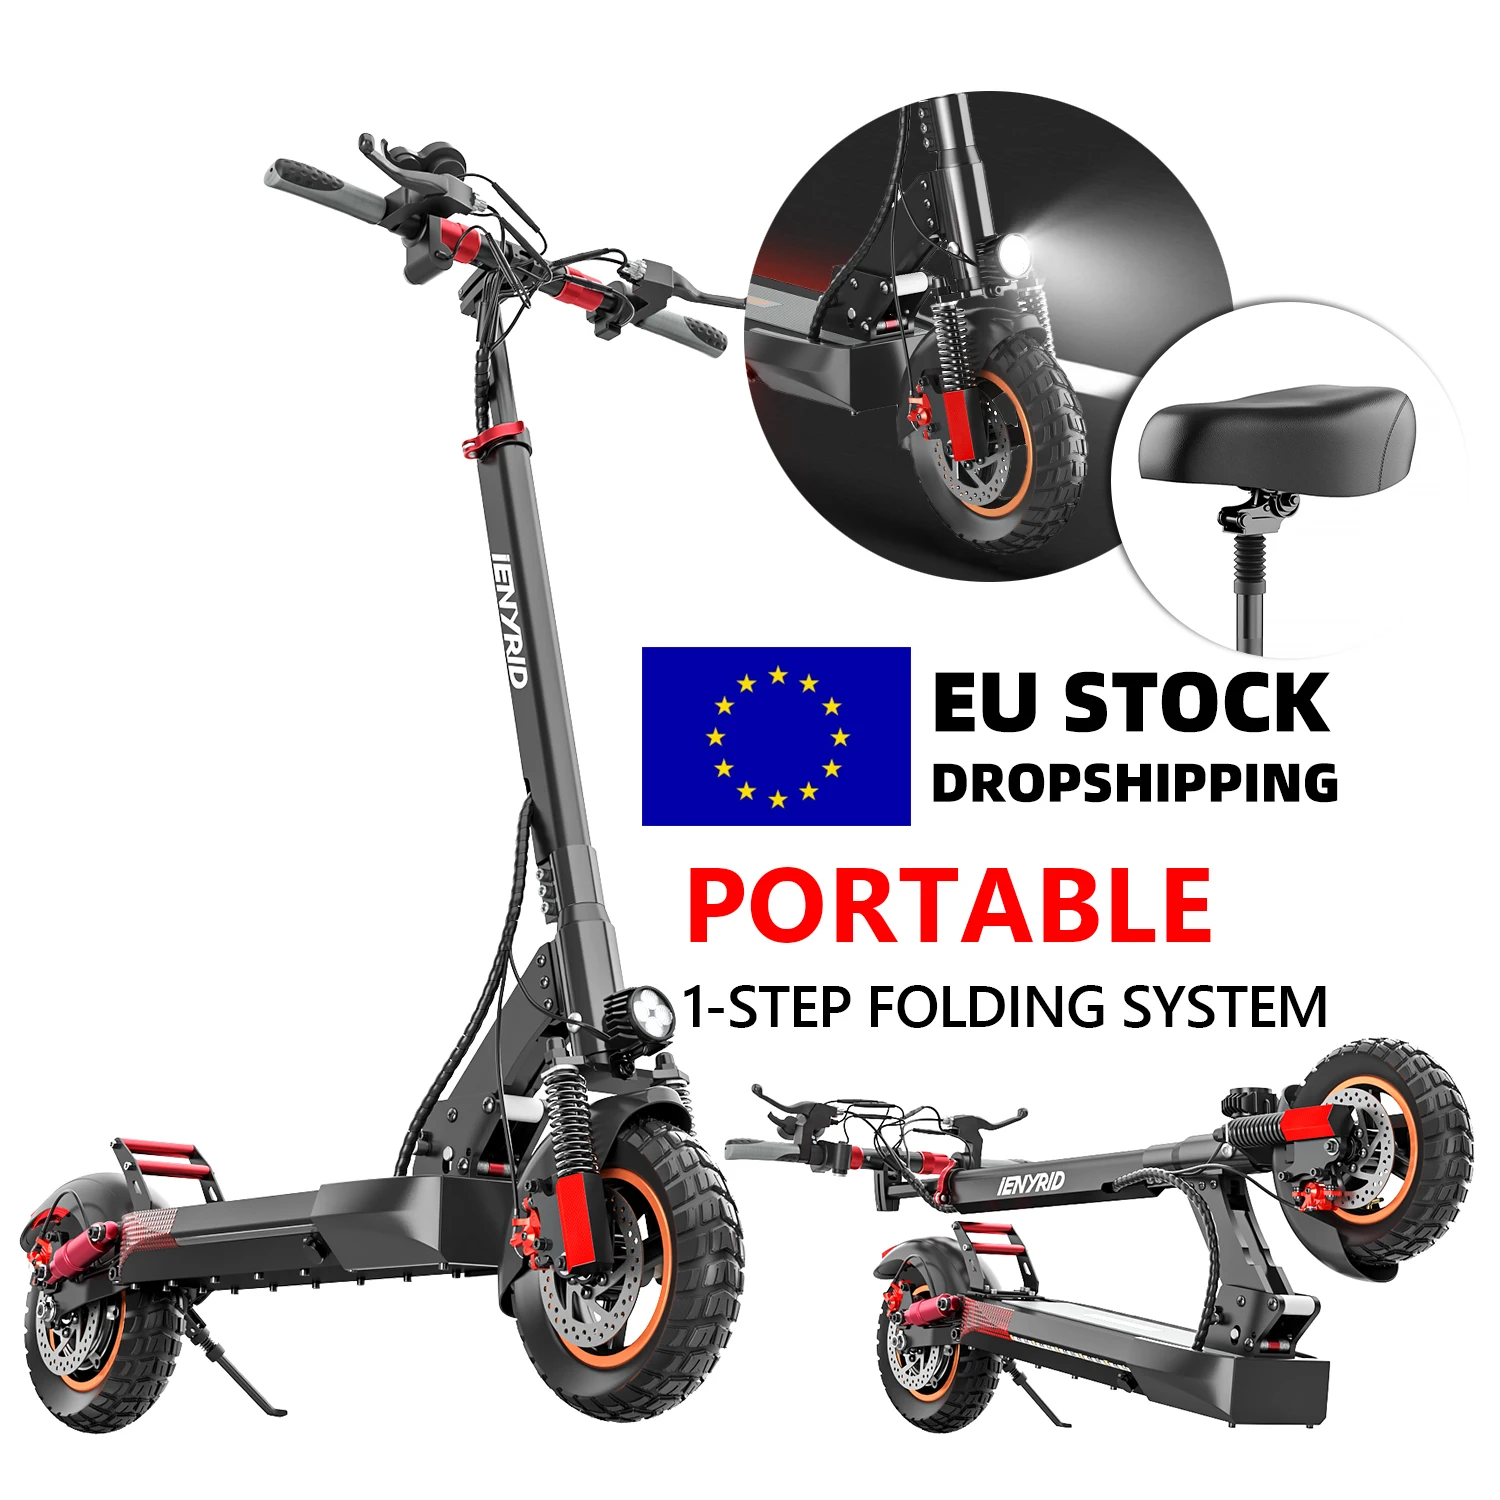 

Europe UK Warehouse iENYRID M4 Pro S electric scooter 10 inch offroad Kick Scooters 500W Motor electric scooter made in china